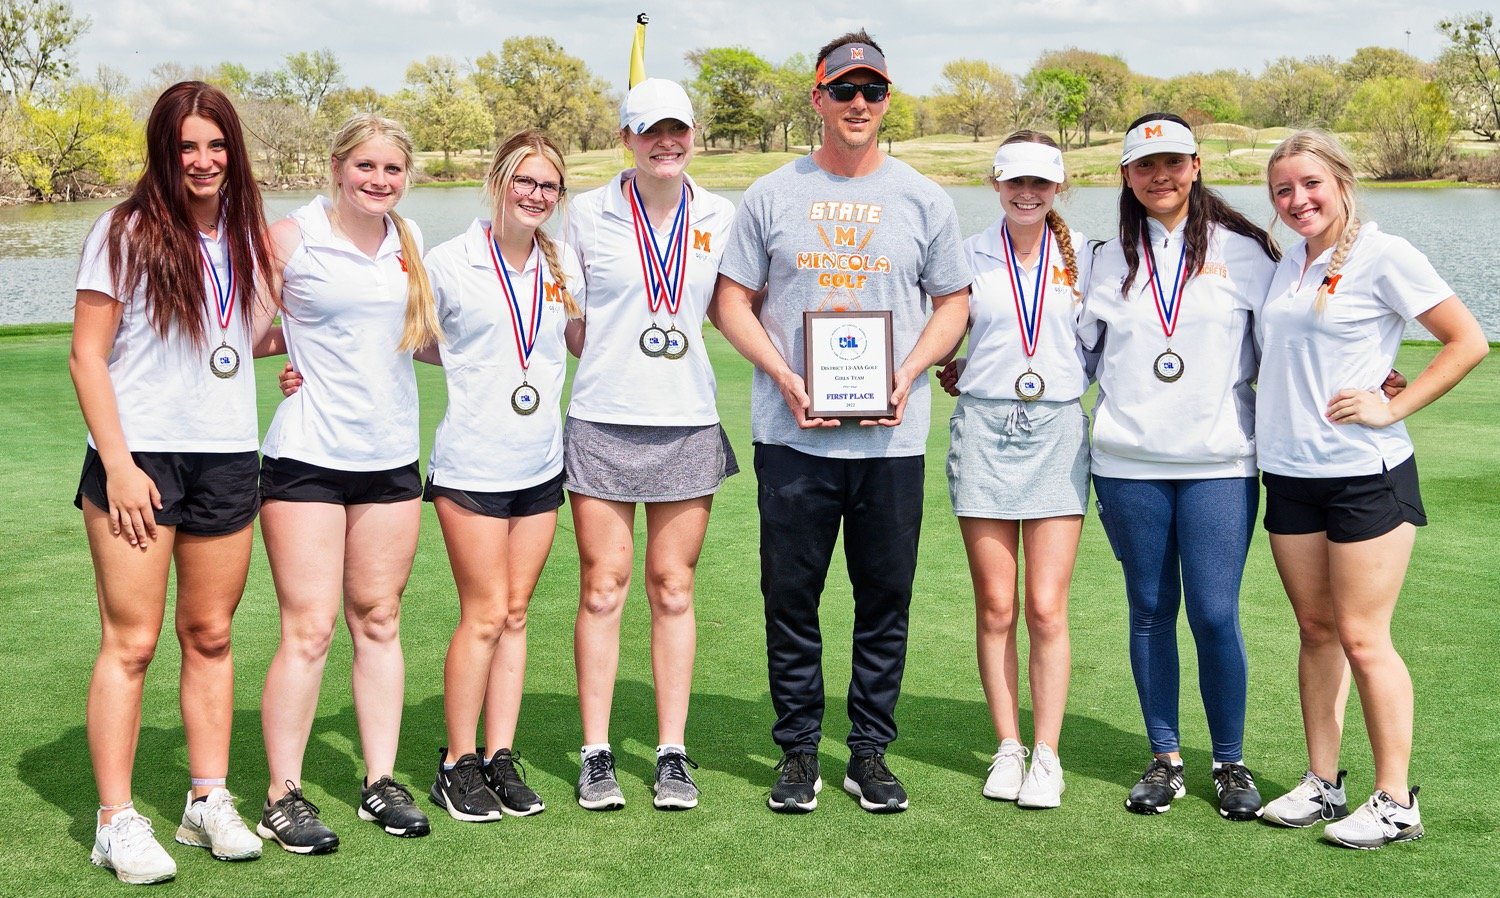 The Mineola girls golf team earned a repeat trip to the regional golf tournament after winning the district championship Monday in Sulphur Springs. They include, from left, Valerie Moreland, Ramsey Anderson, Bransyn Anderson, Ava Johnson, Coach Ryan Steadman, Sunni Ruffin, Savannah Lopez and Sarah Smith. They will be vying to return to the state tournament for the second straight year April 20 at Oakhurst in Bullard. [see some swings]